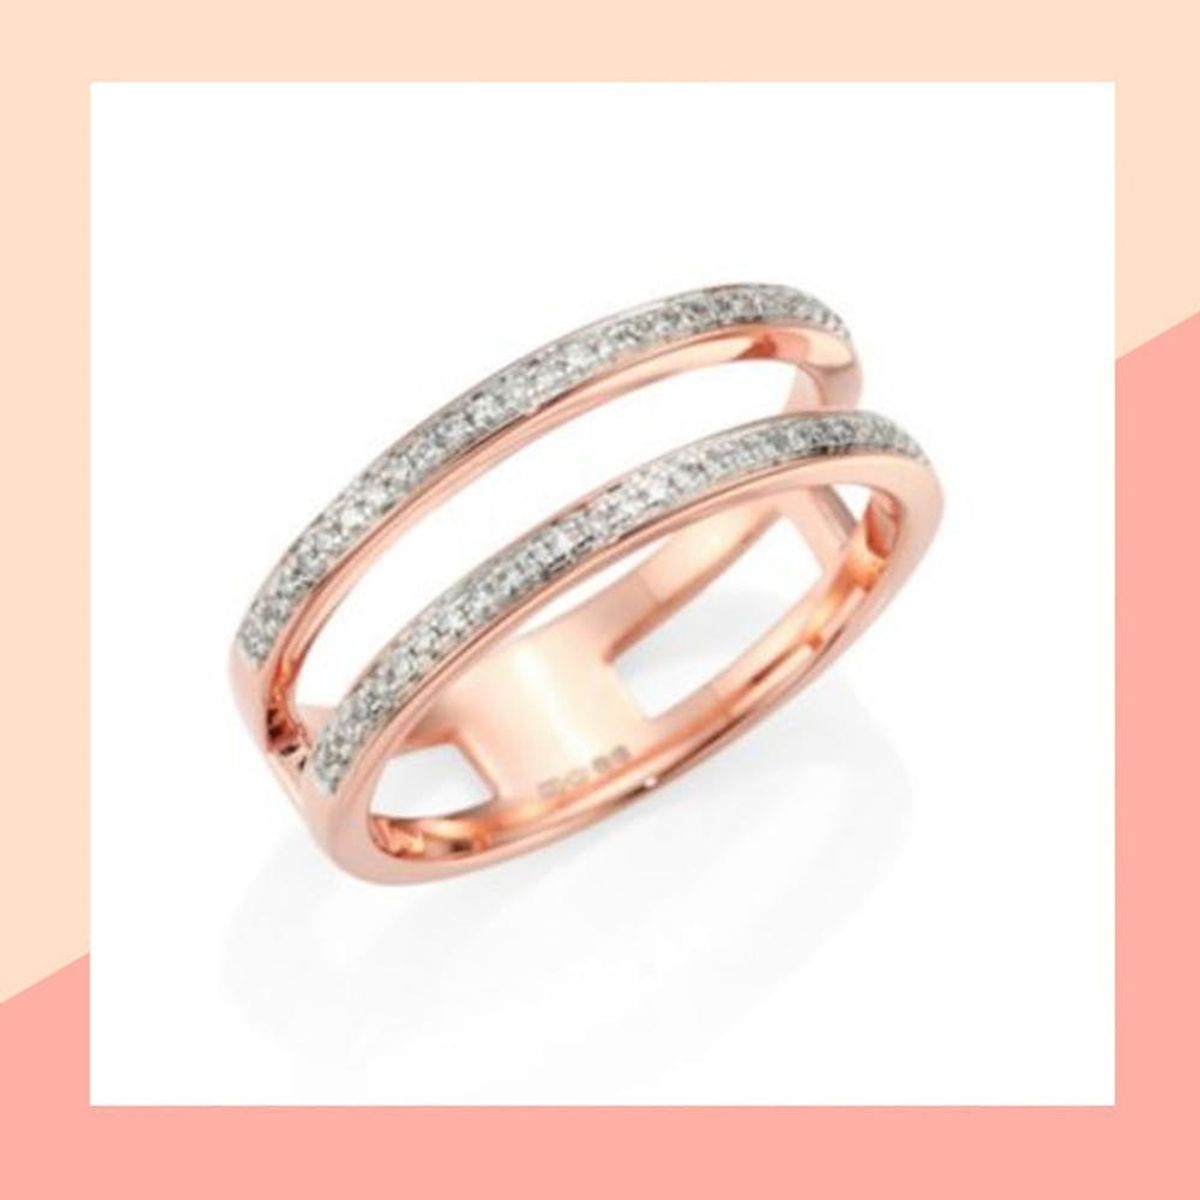 8 Unique Wedding Bands That Don’t Require an Engagement Ring